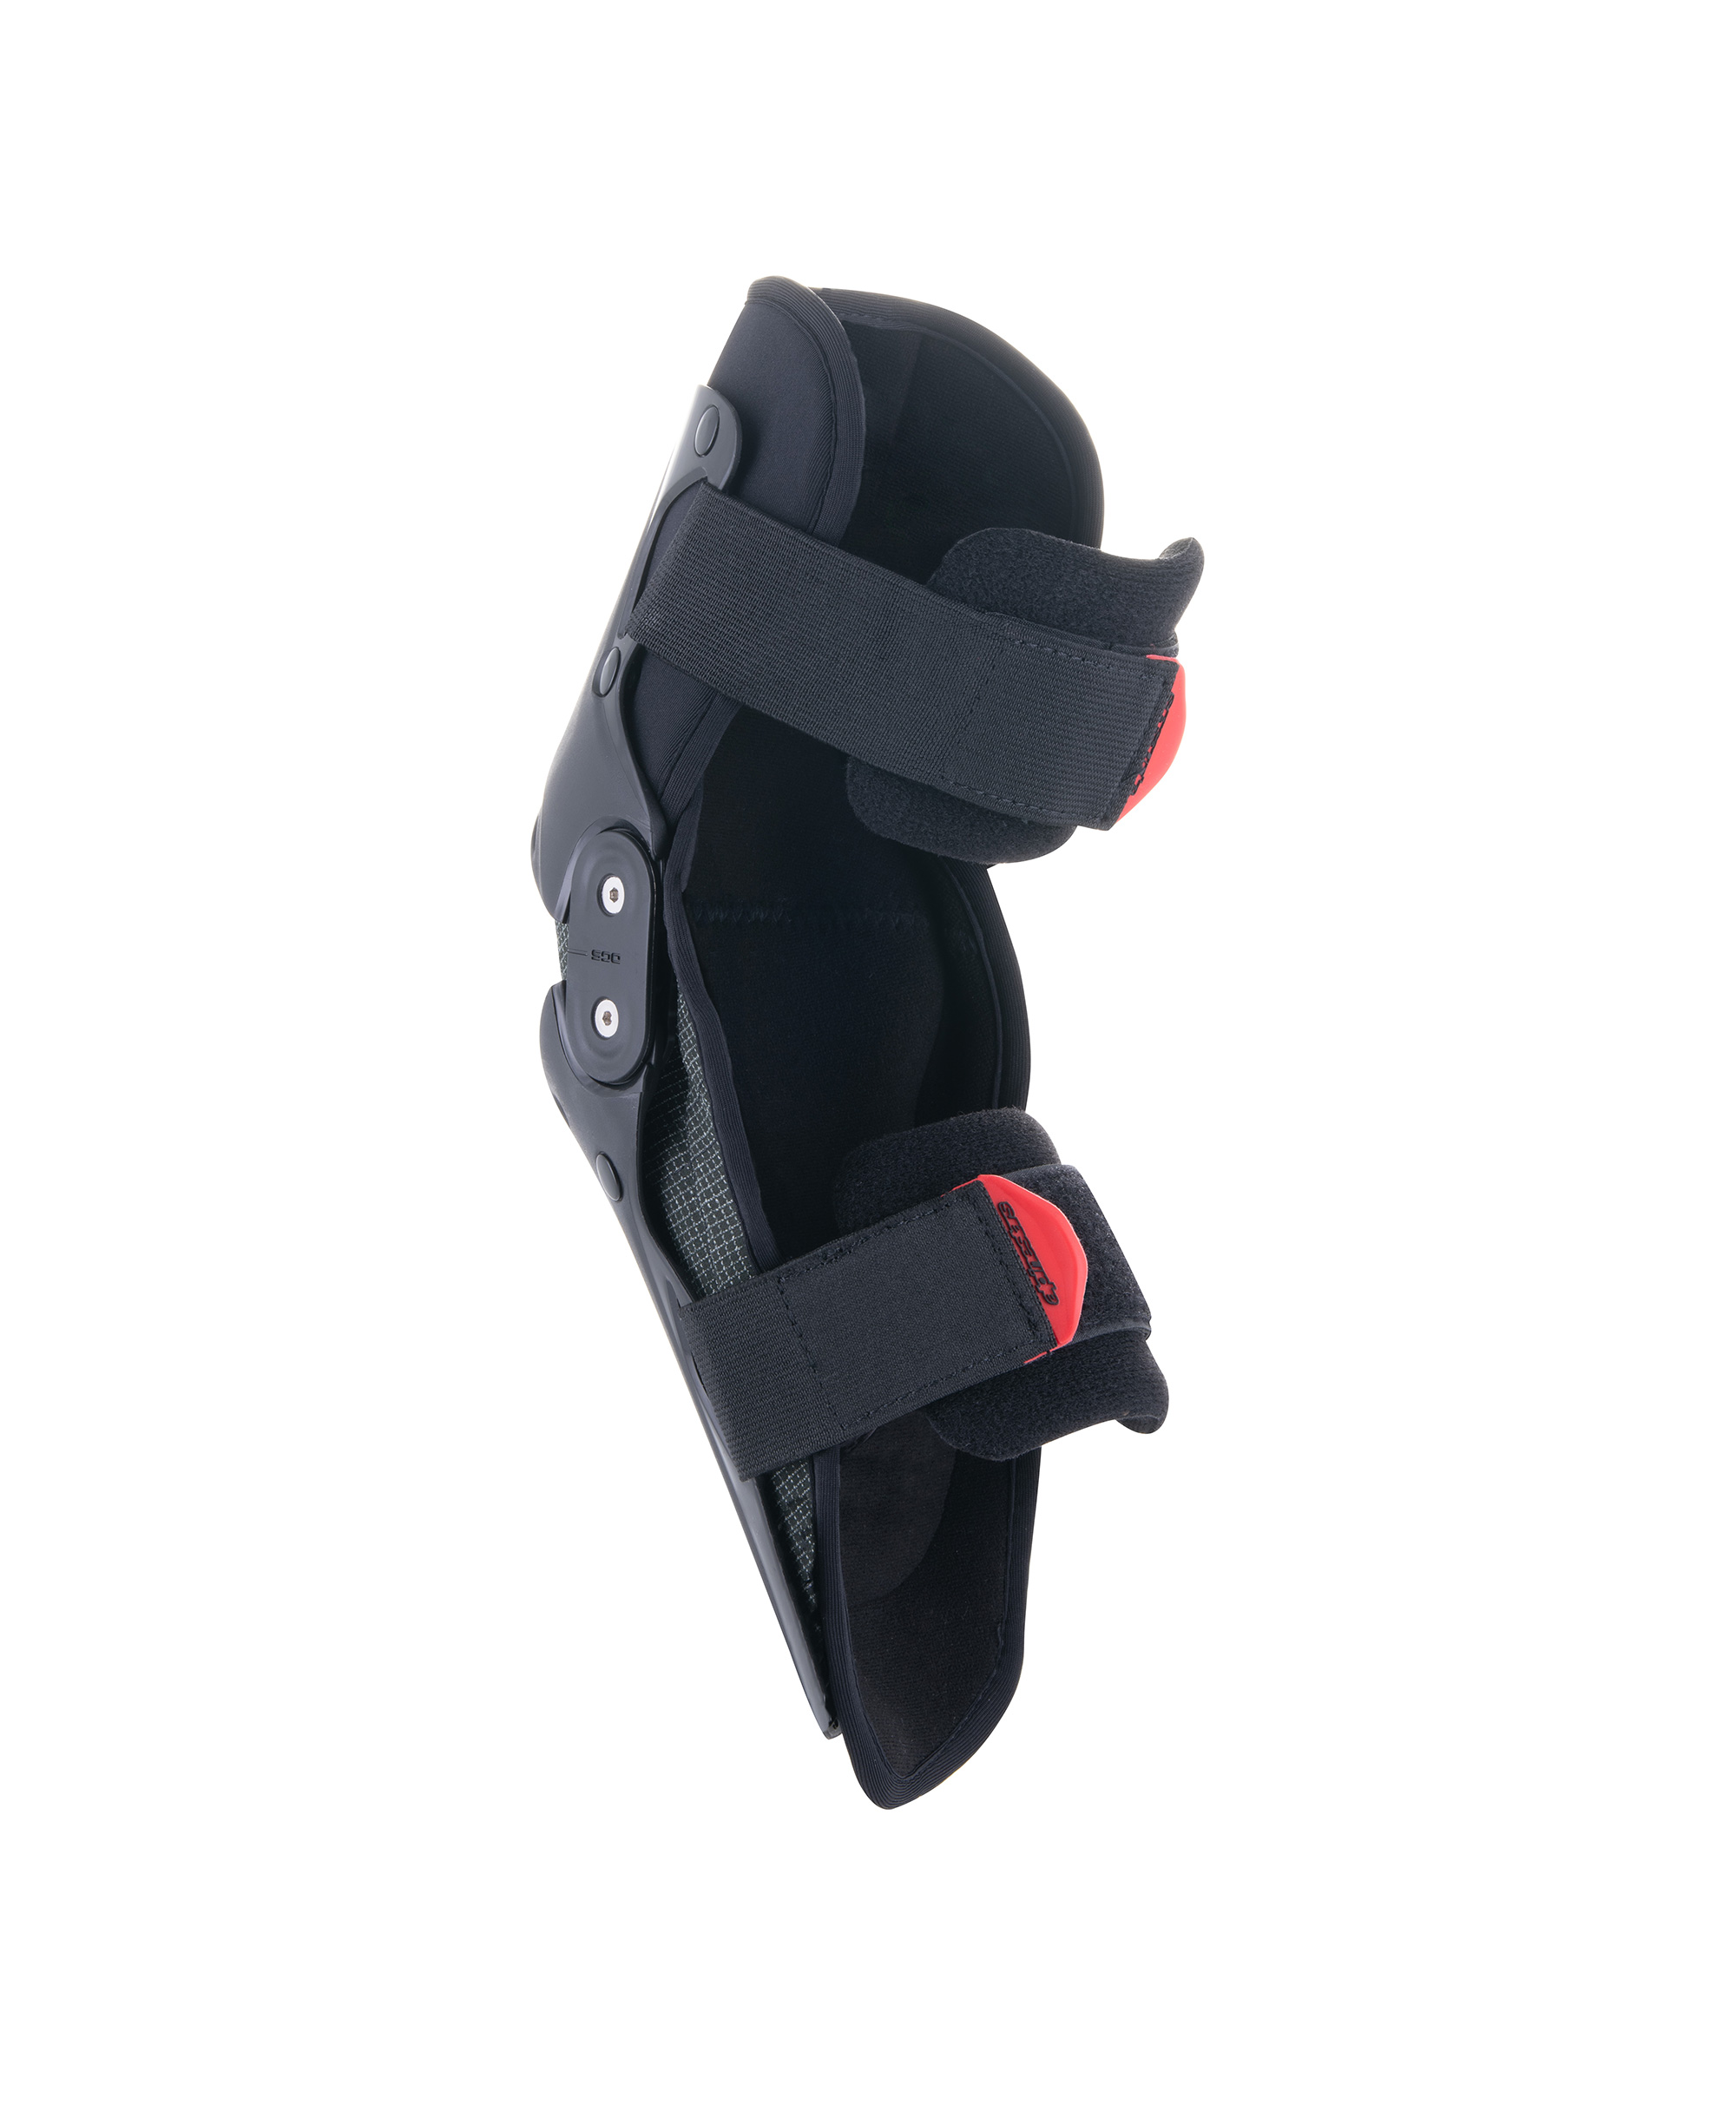 SX-1 YOUTH KNEE PROTECTOR BLACK RED